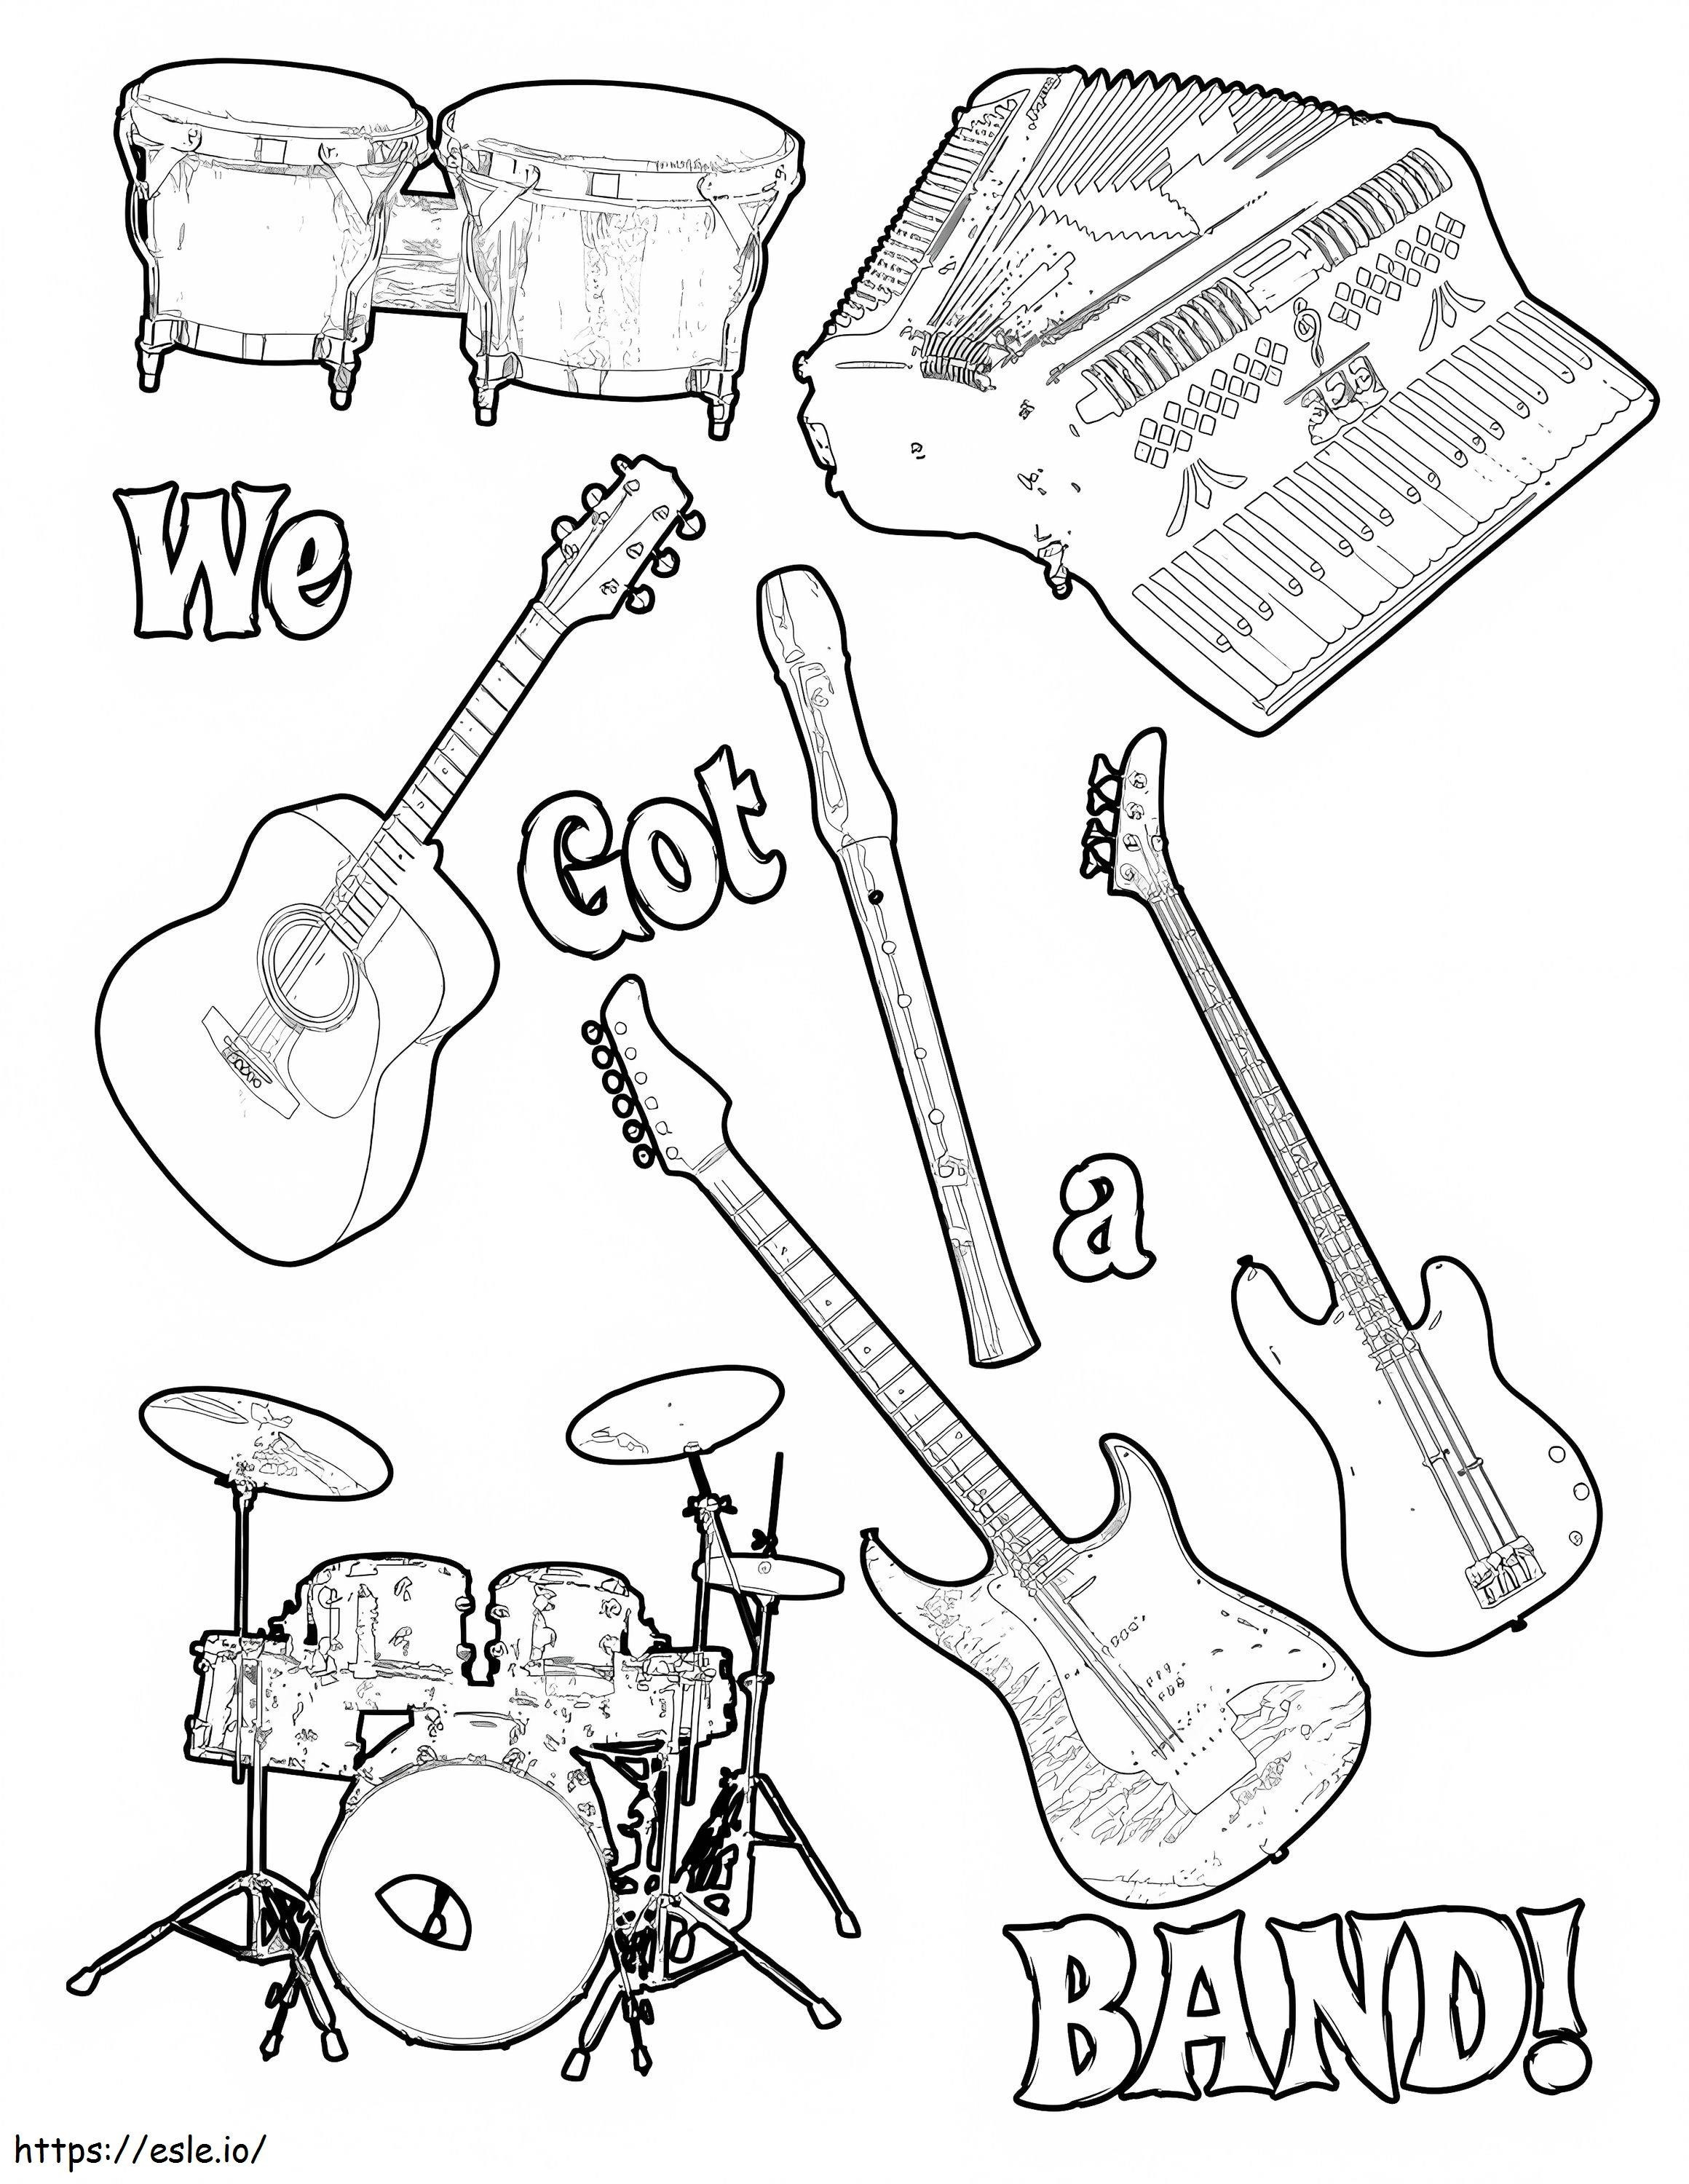 1528509586 Marvelous Music Coloring Booka4 coloring page